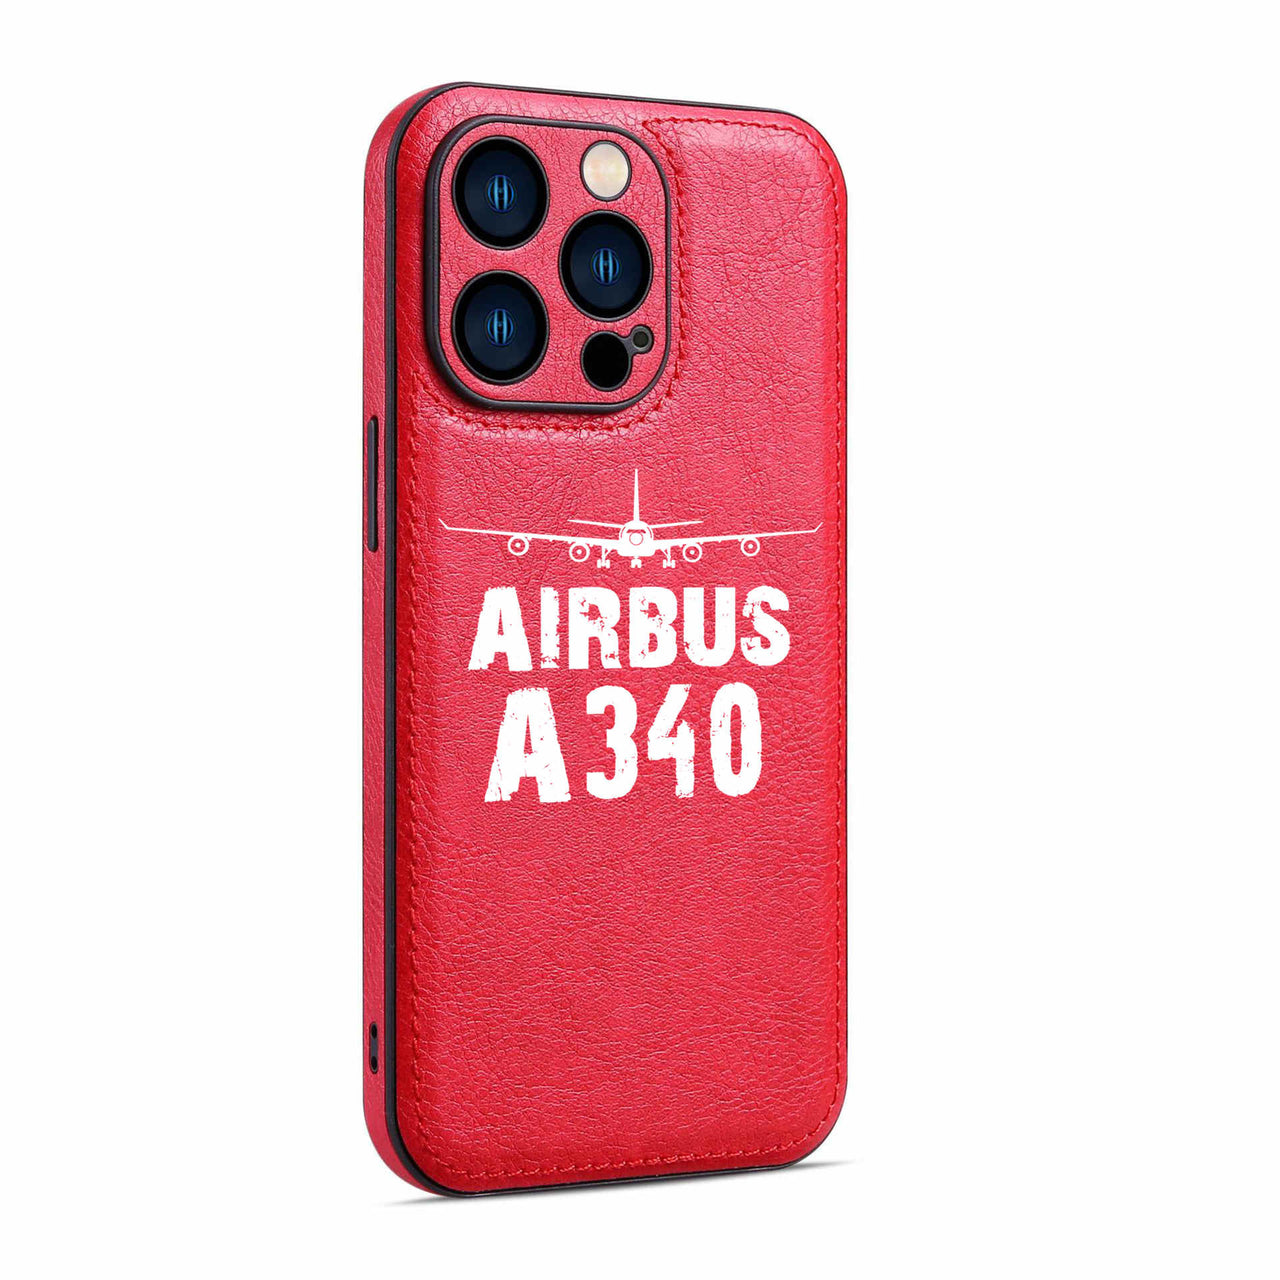 Airbus A340 & Plane Designed Leather iPhone Cases